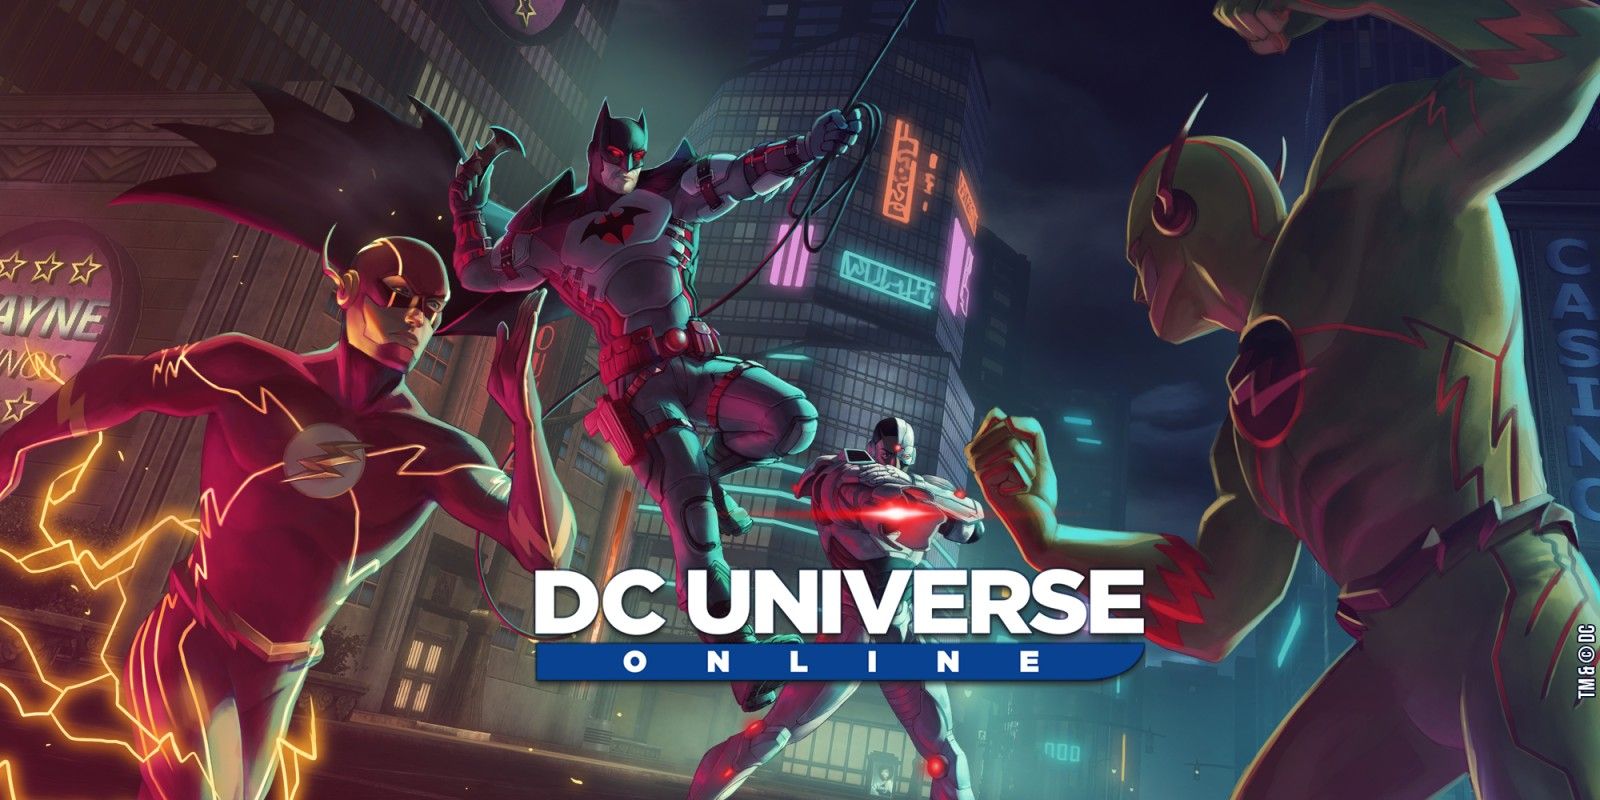 Promotional art for the Nintendo Switch video game DC Universe Online.